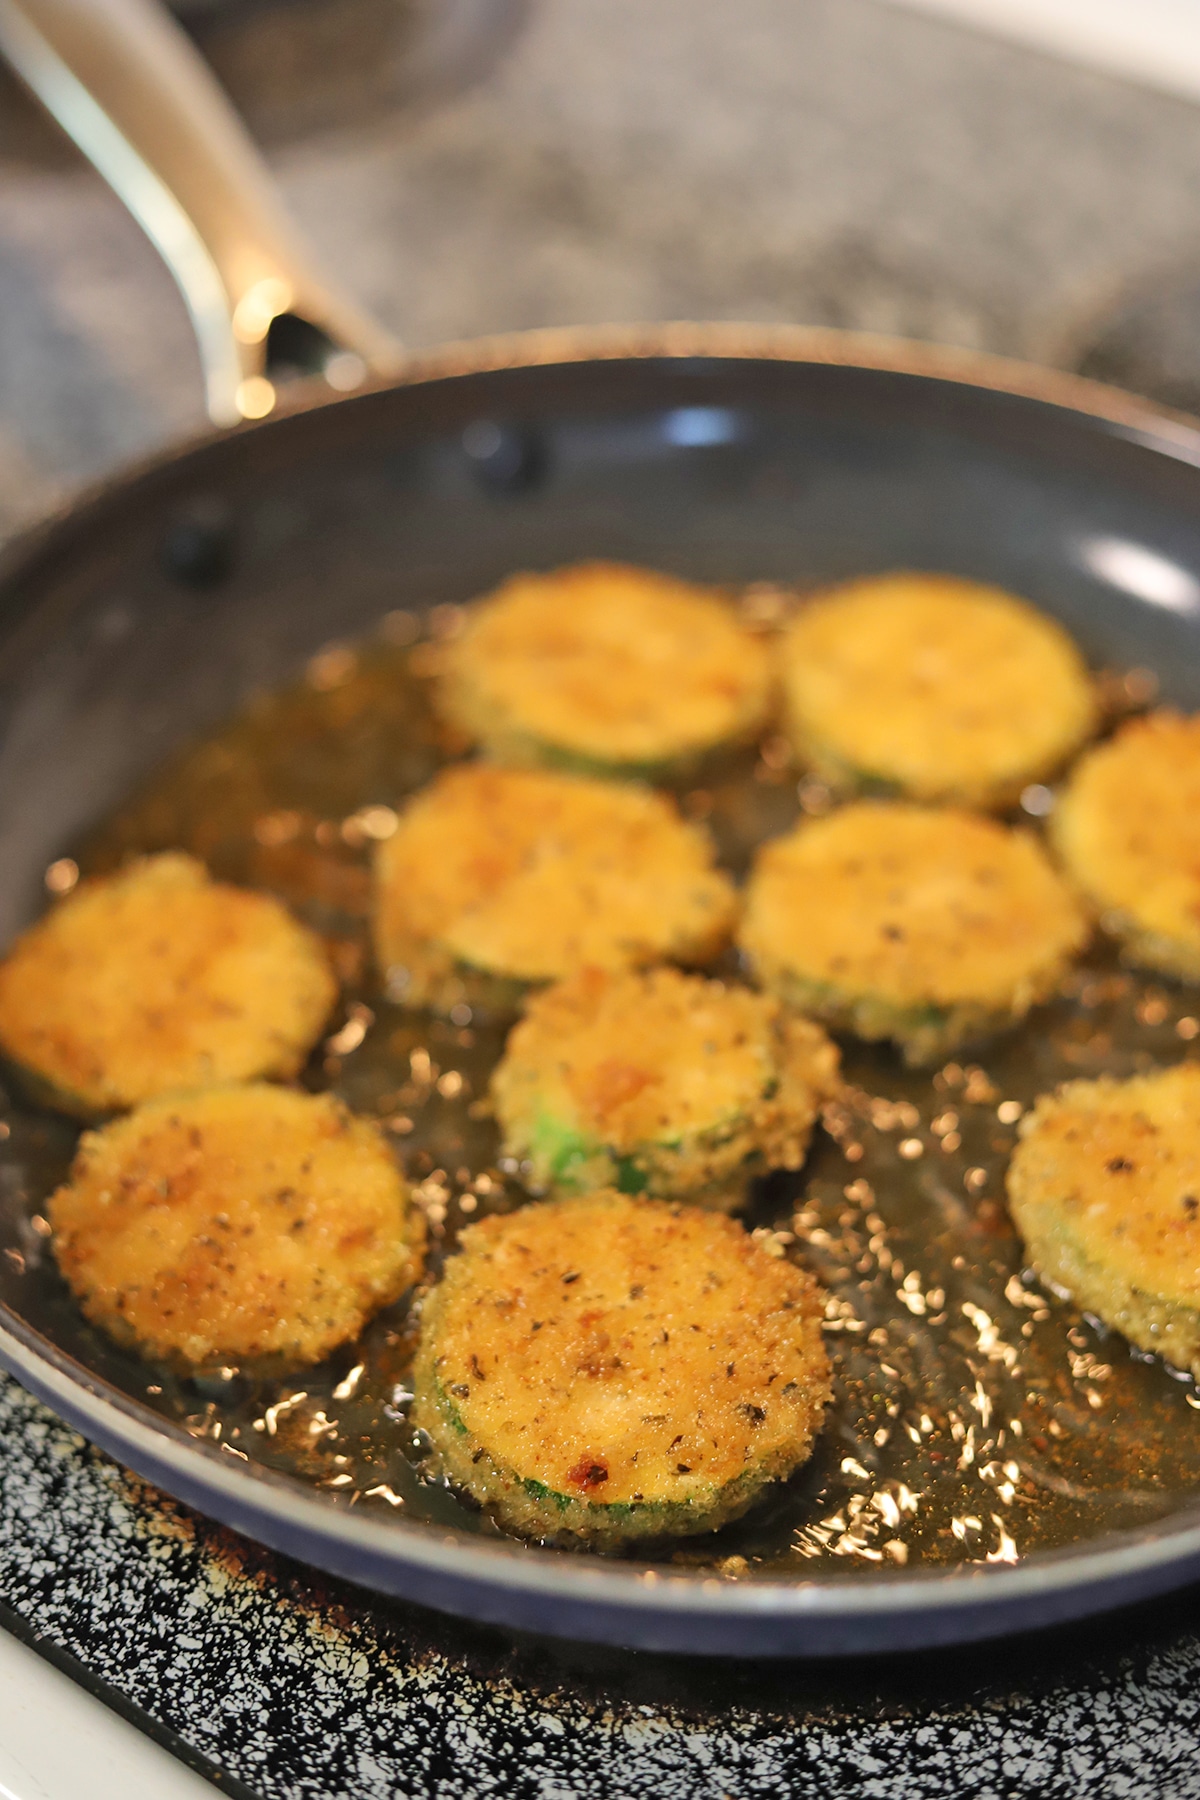 Zucchini slices frying in skillet.